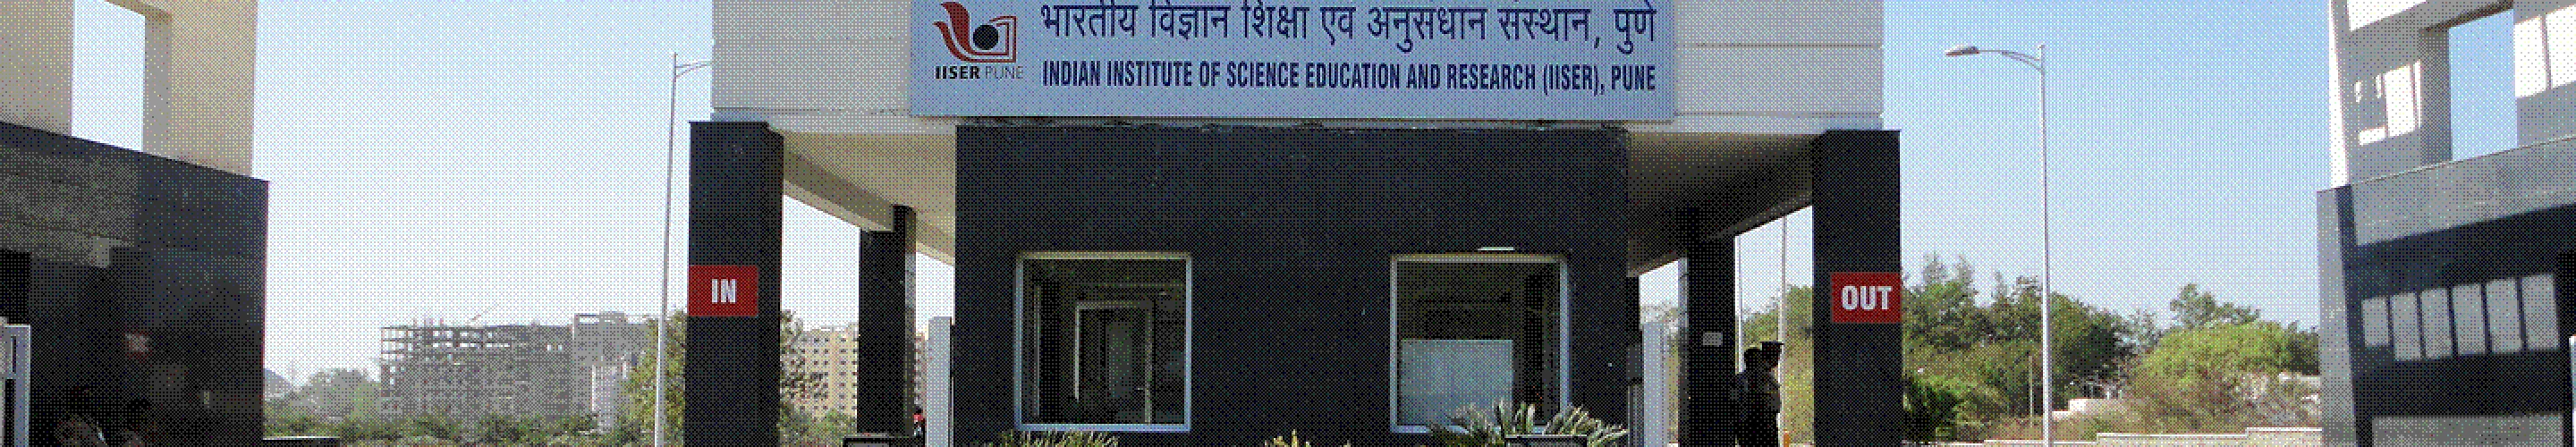 Indian Institute of Science, Education and Research